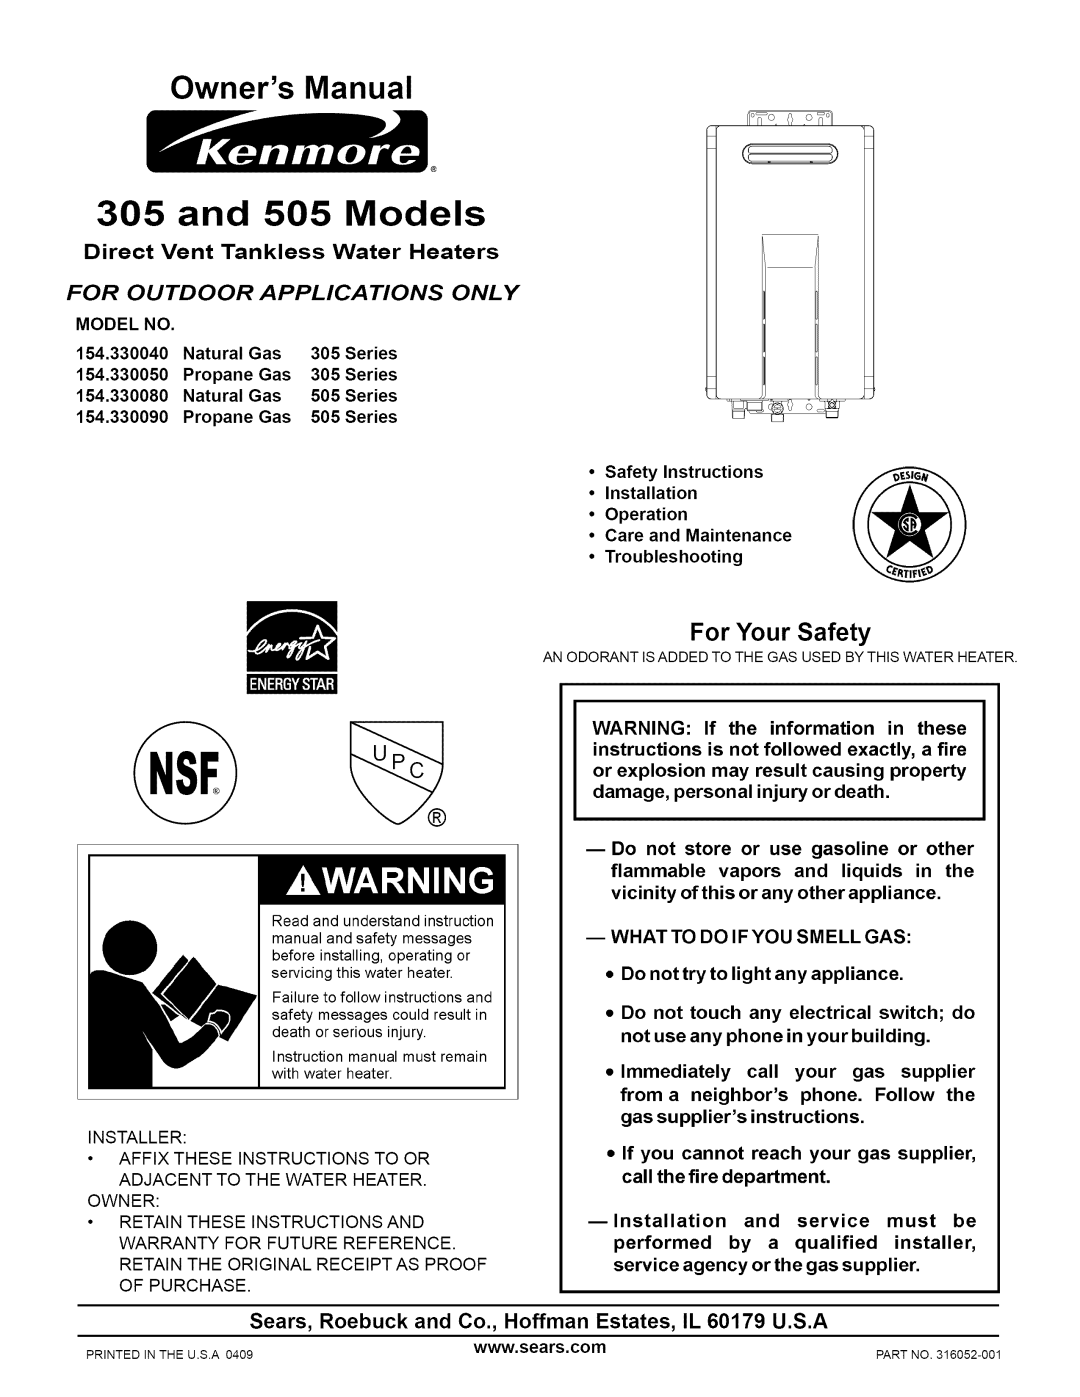 Kenmore 305 owner manual and 505 Models, For Your Safety, Direct Vent Tankless Water Heaters 